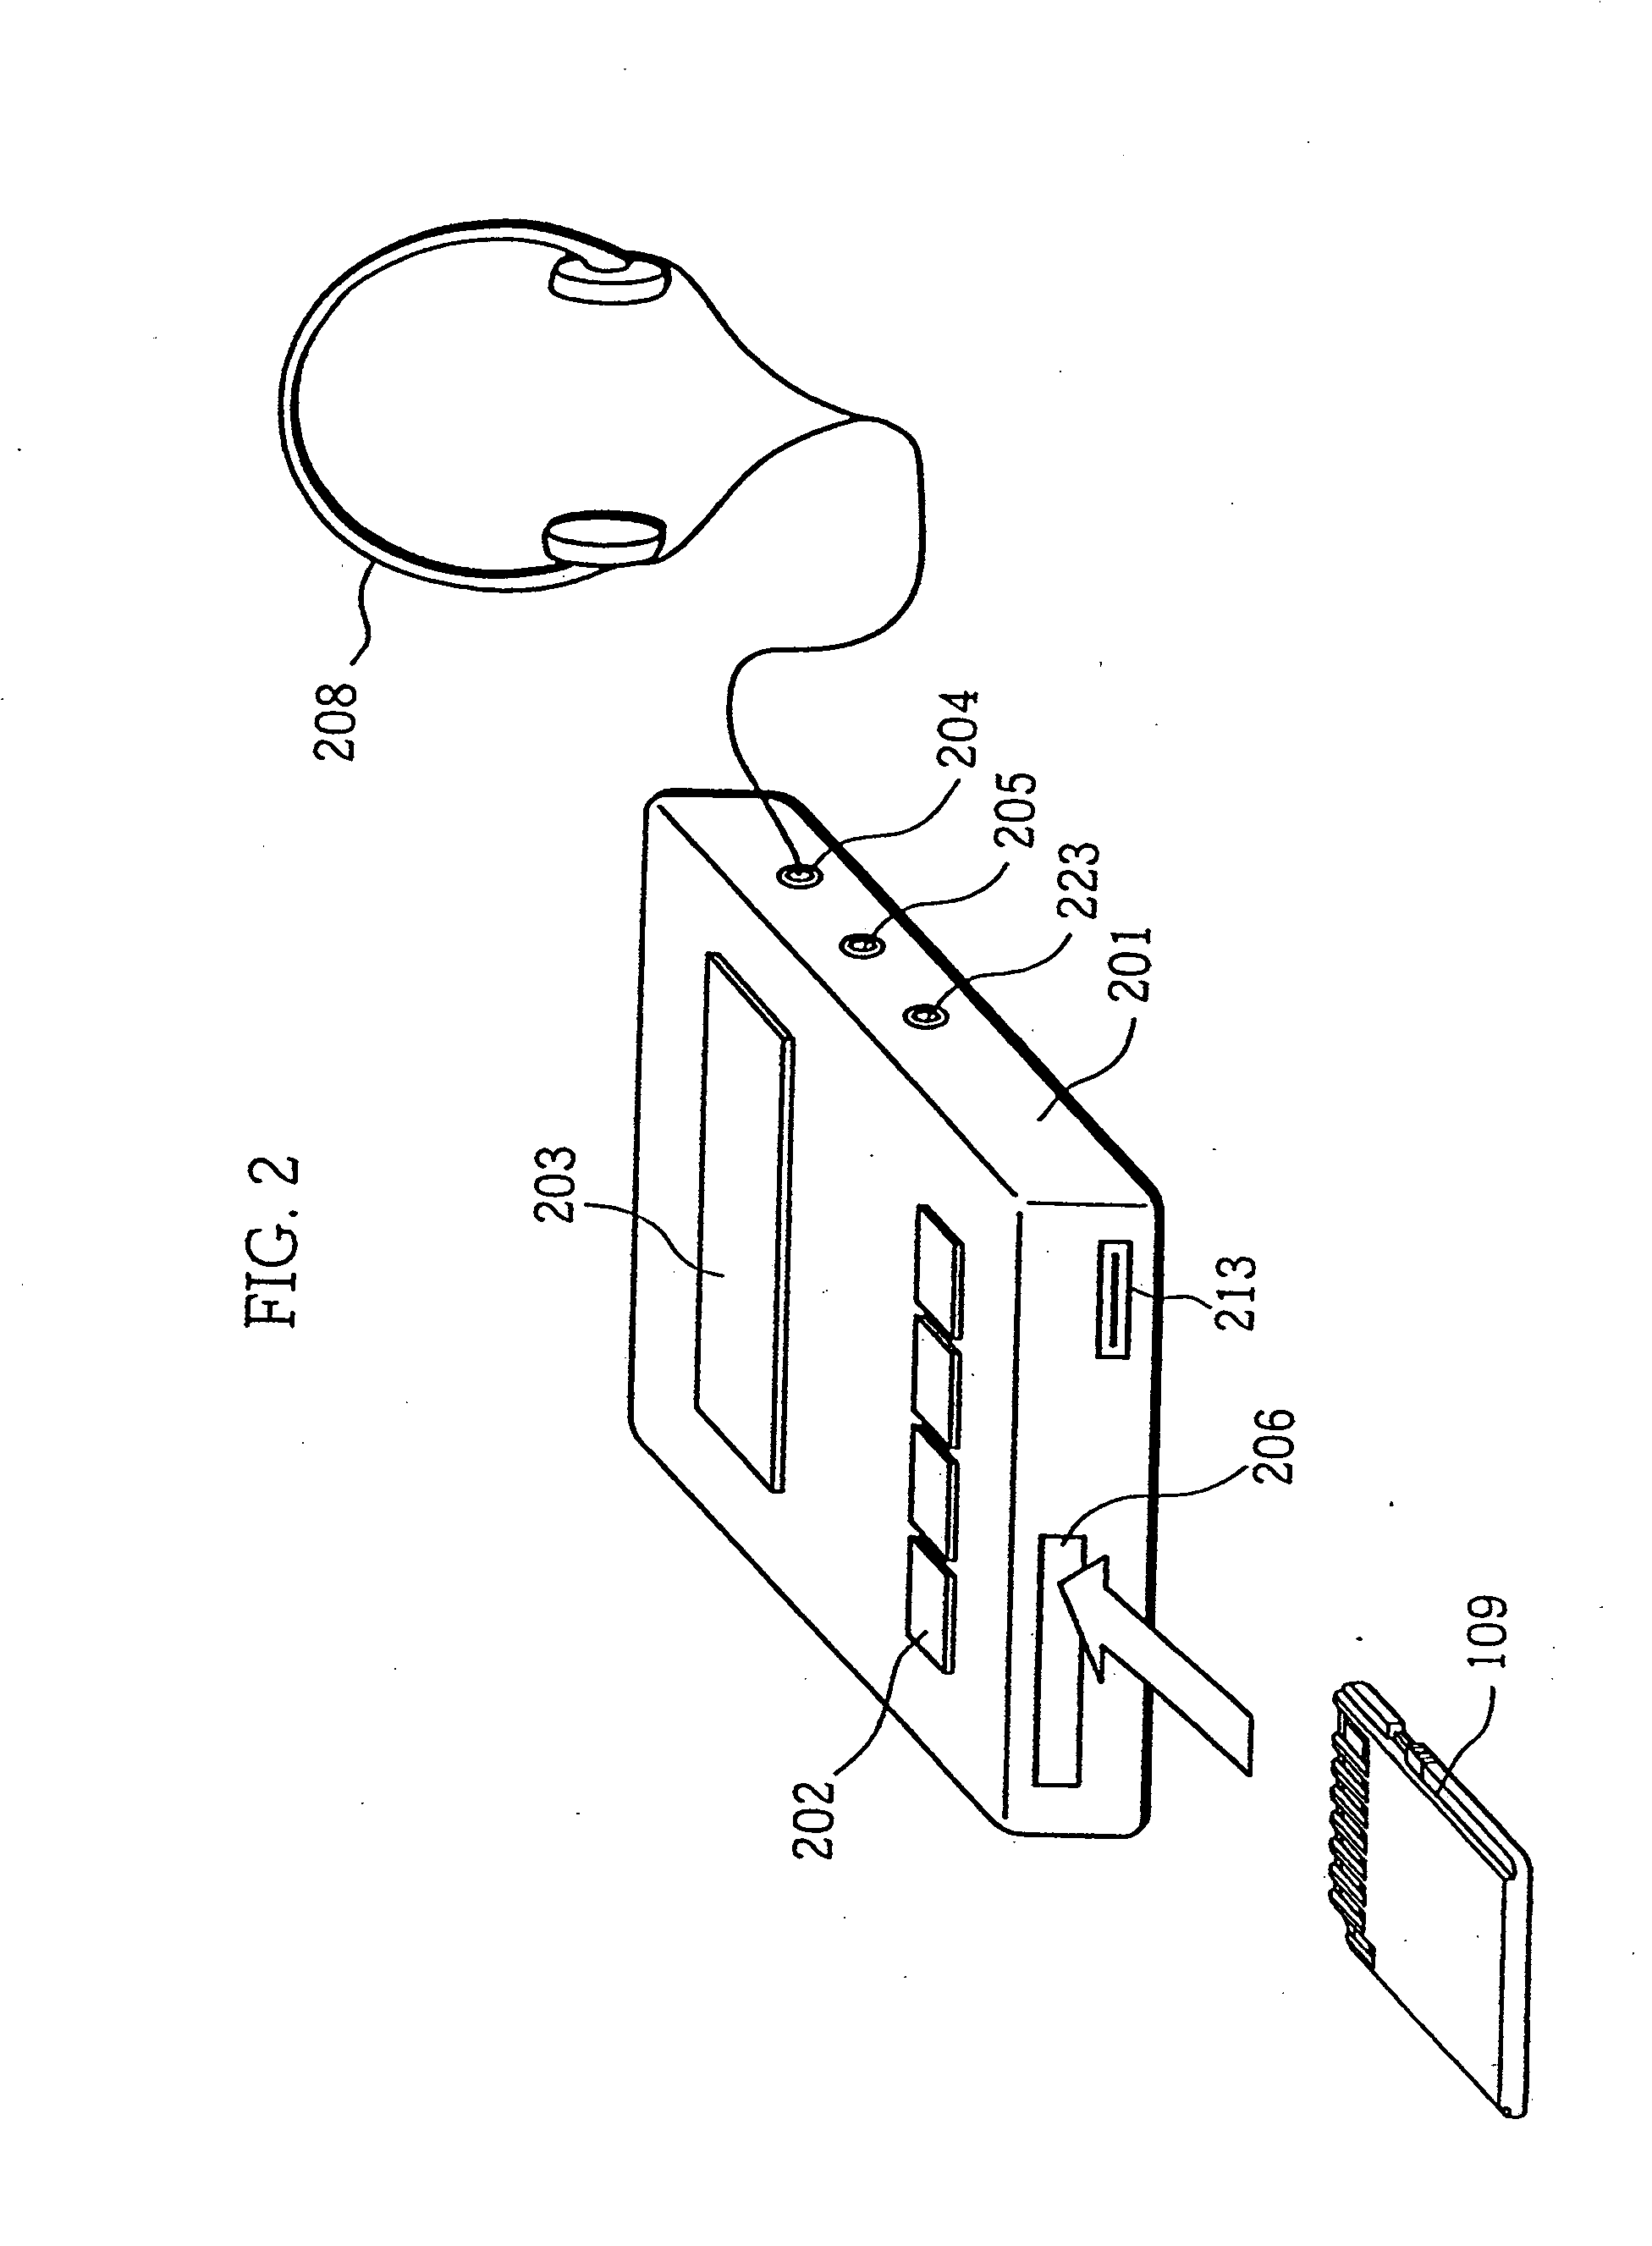 Semiconductor memory card and data reading apparatus, and data reading/reproducing apparatus